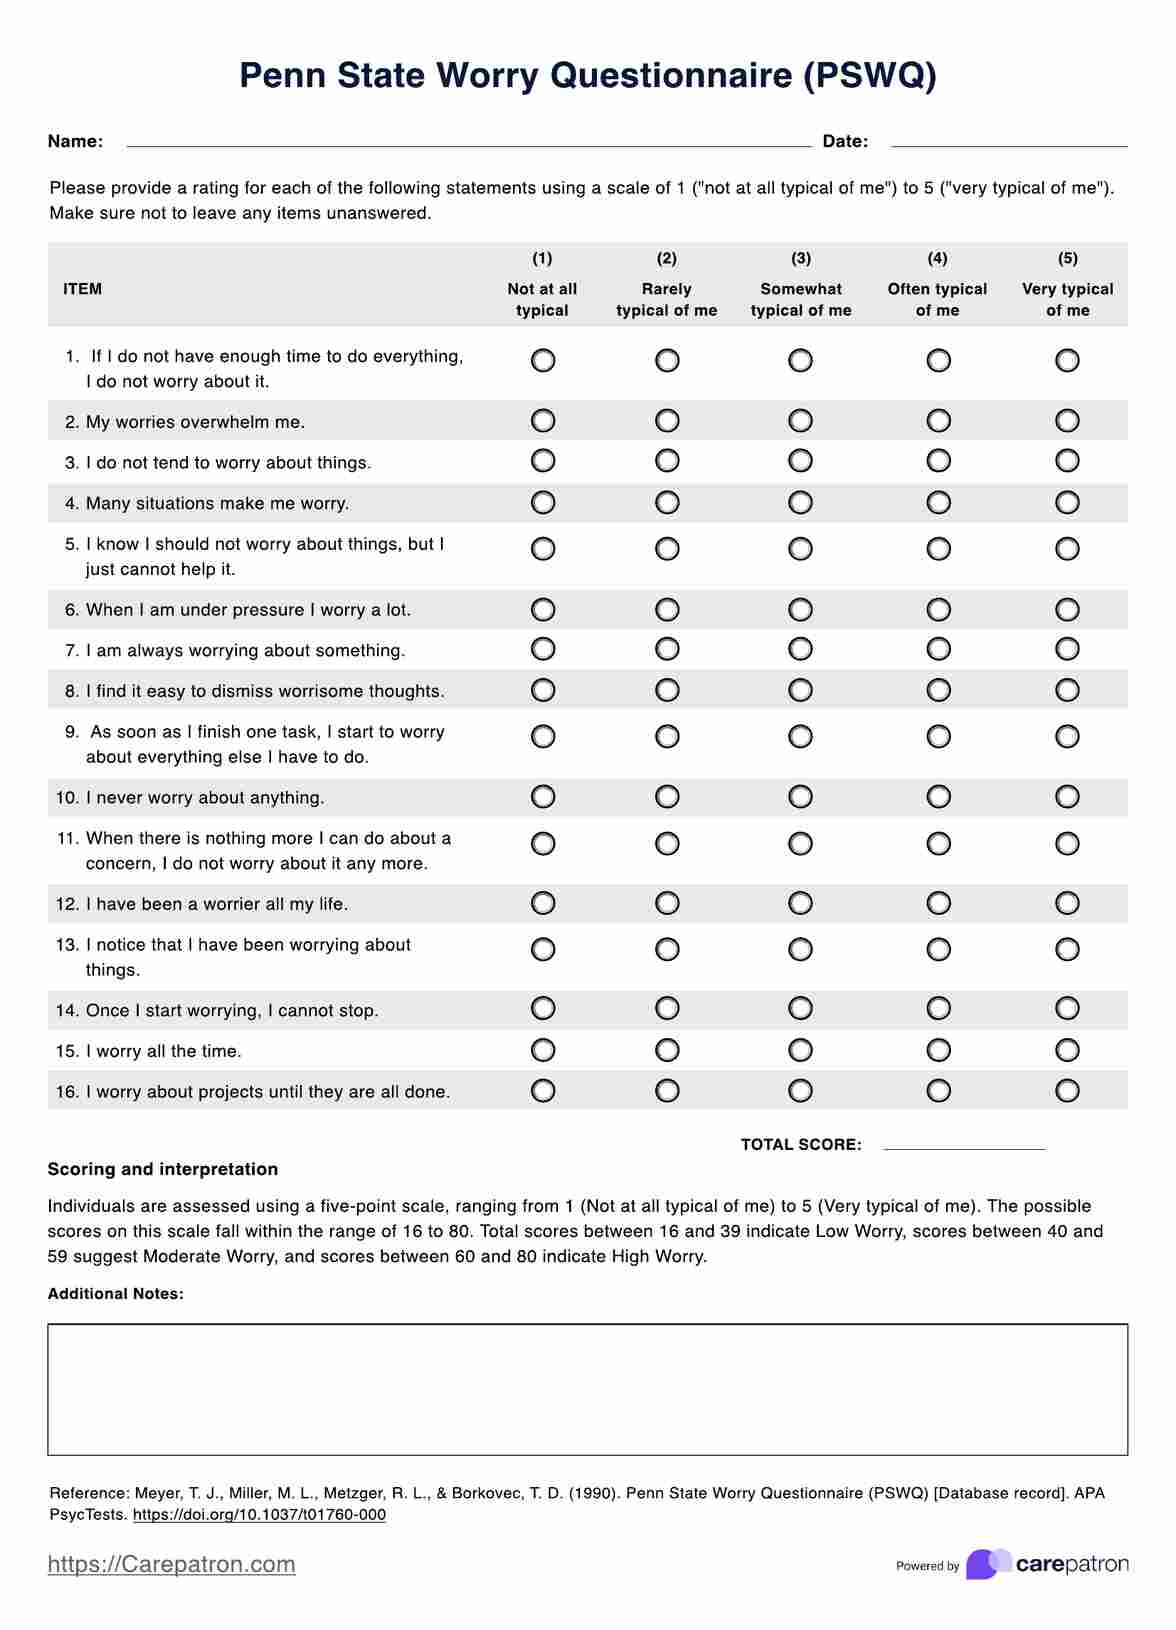 Penn State Worry Questionnaire PDF Example